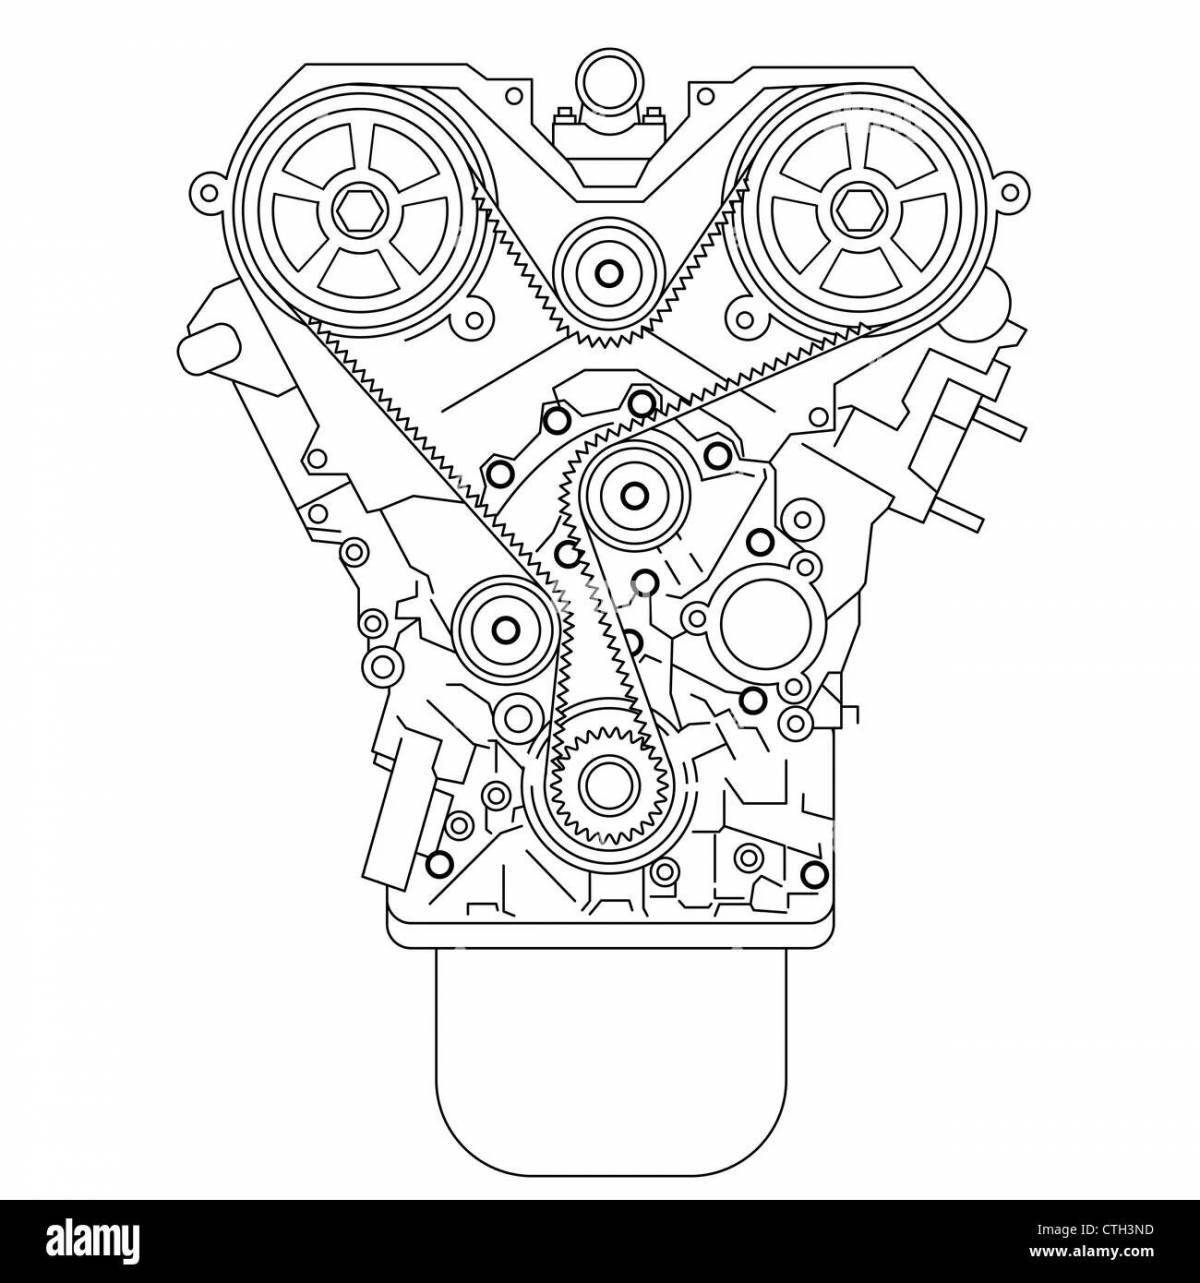 Sparkling engine coloring page